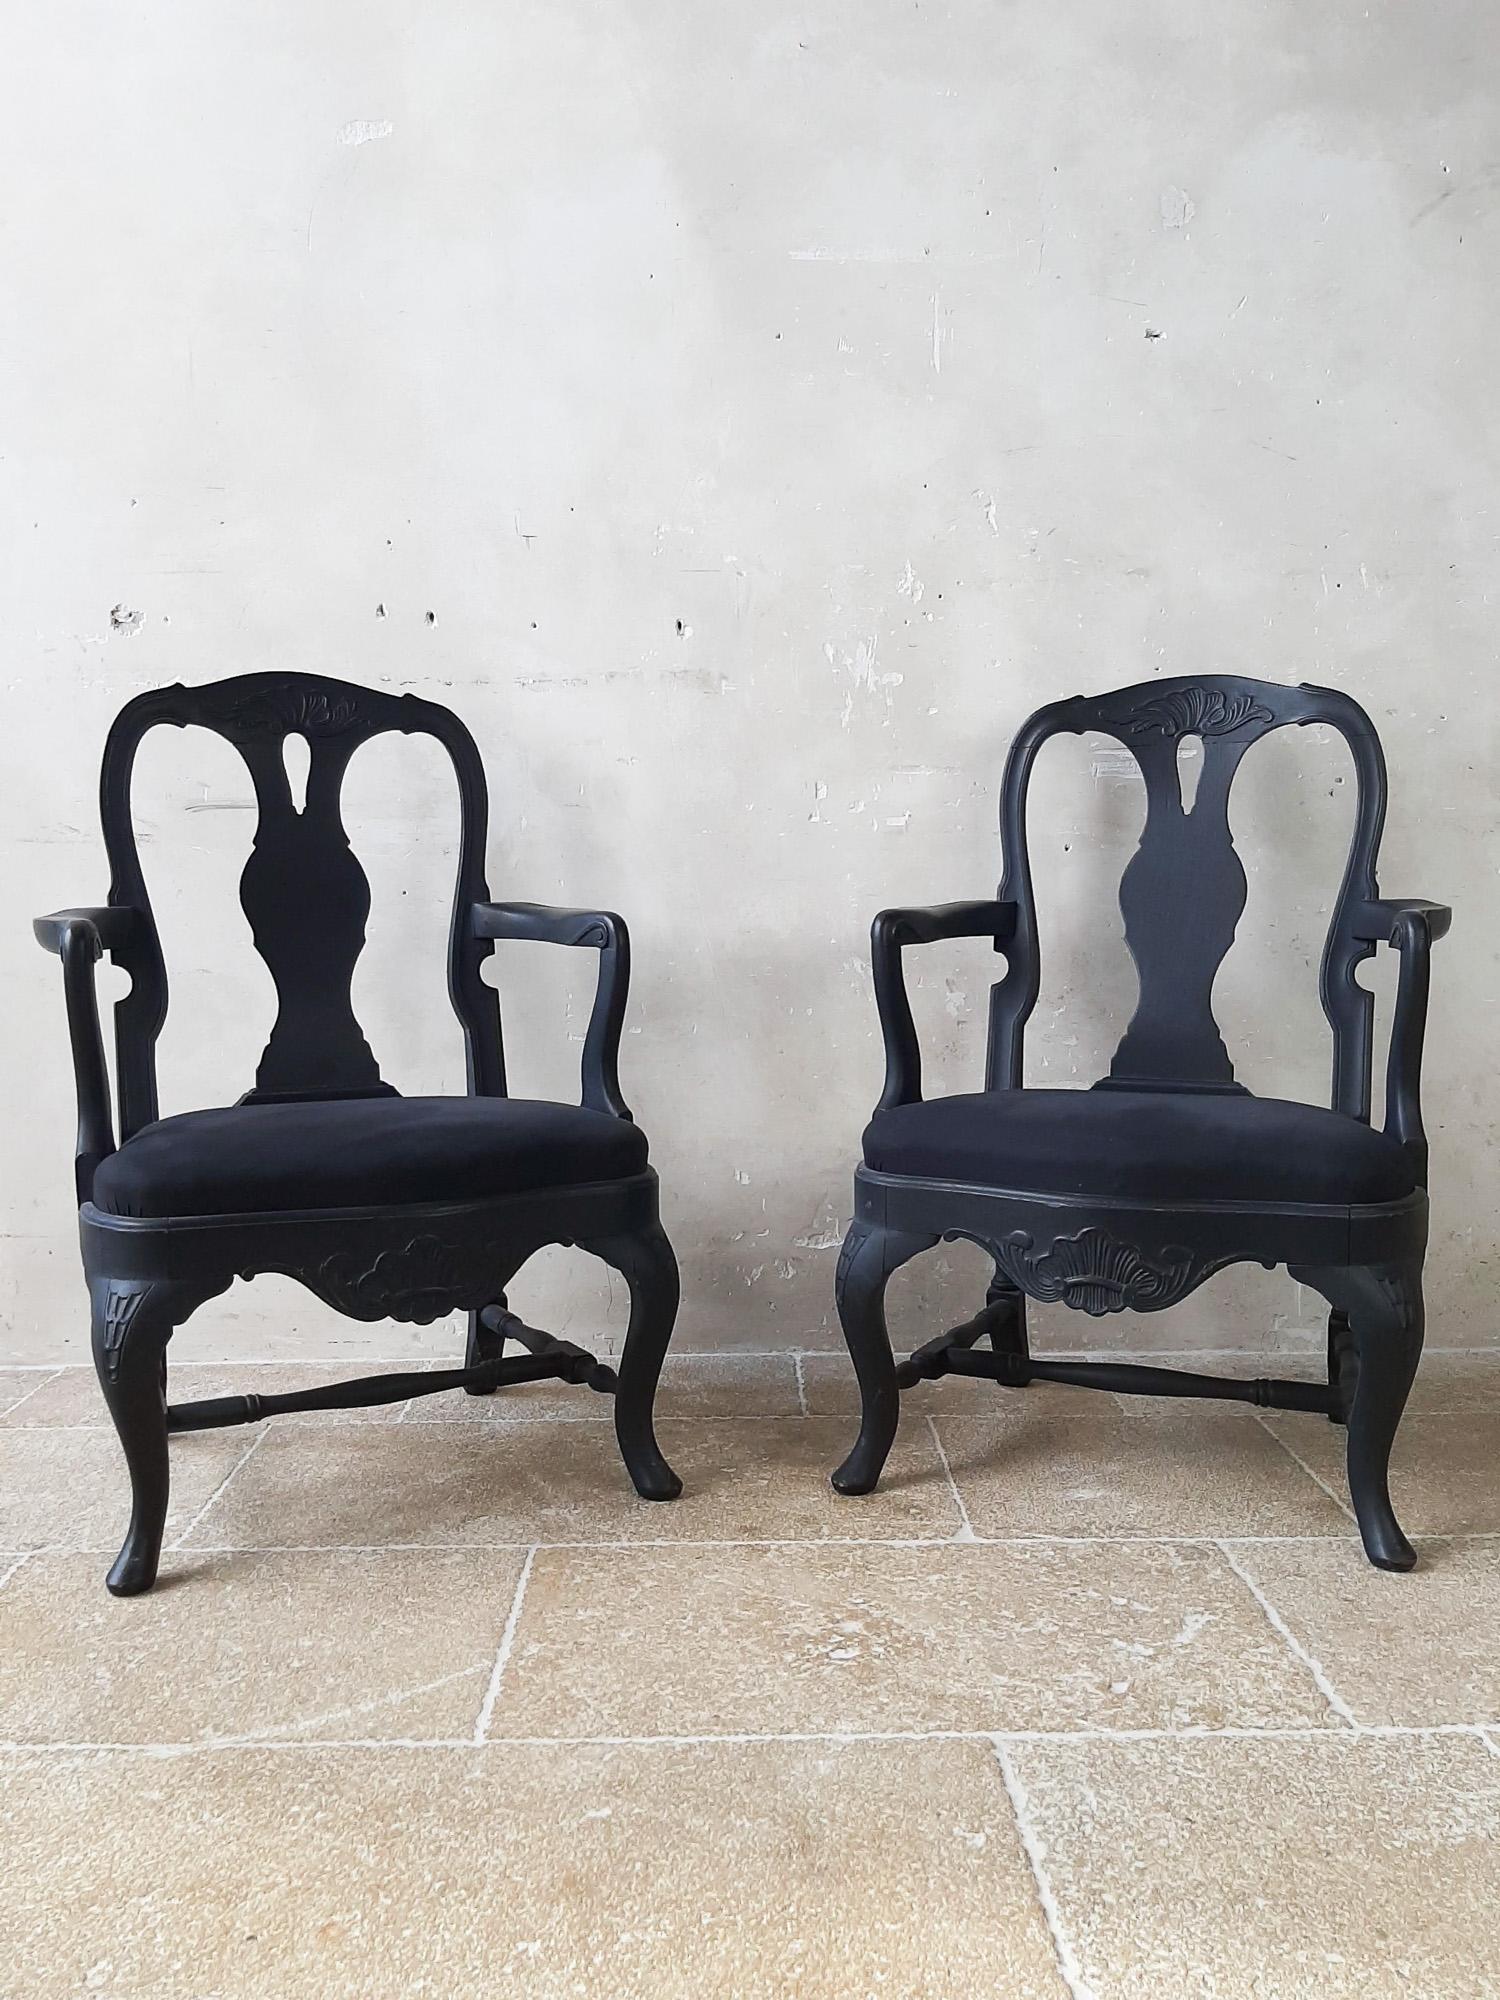 Pair of old French renovated armchairs in black. These old wooden chairs have a beautiful carved detail on the front and legs. Stylishly renovated with charcoal black patina and black upholstery.

Measure: H 93 x W 64 x D 50 cm
seat height 42